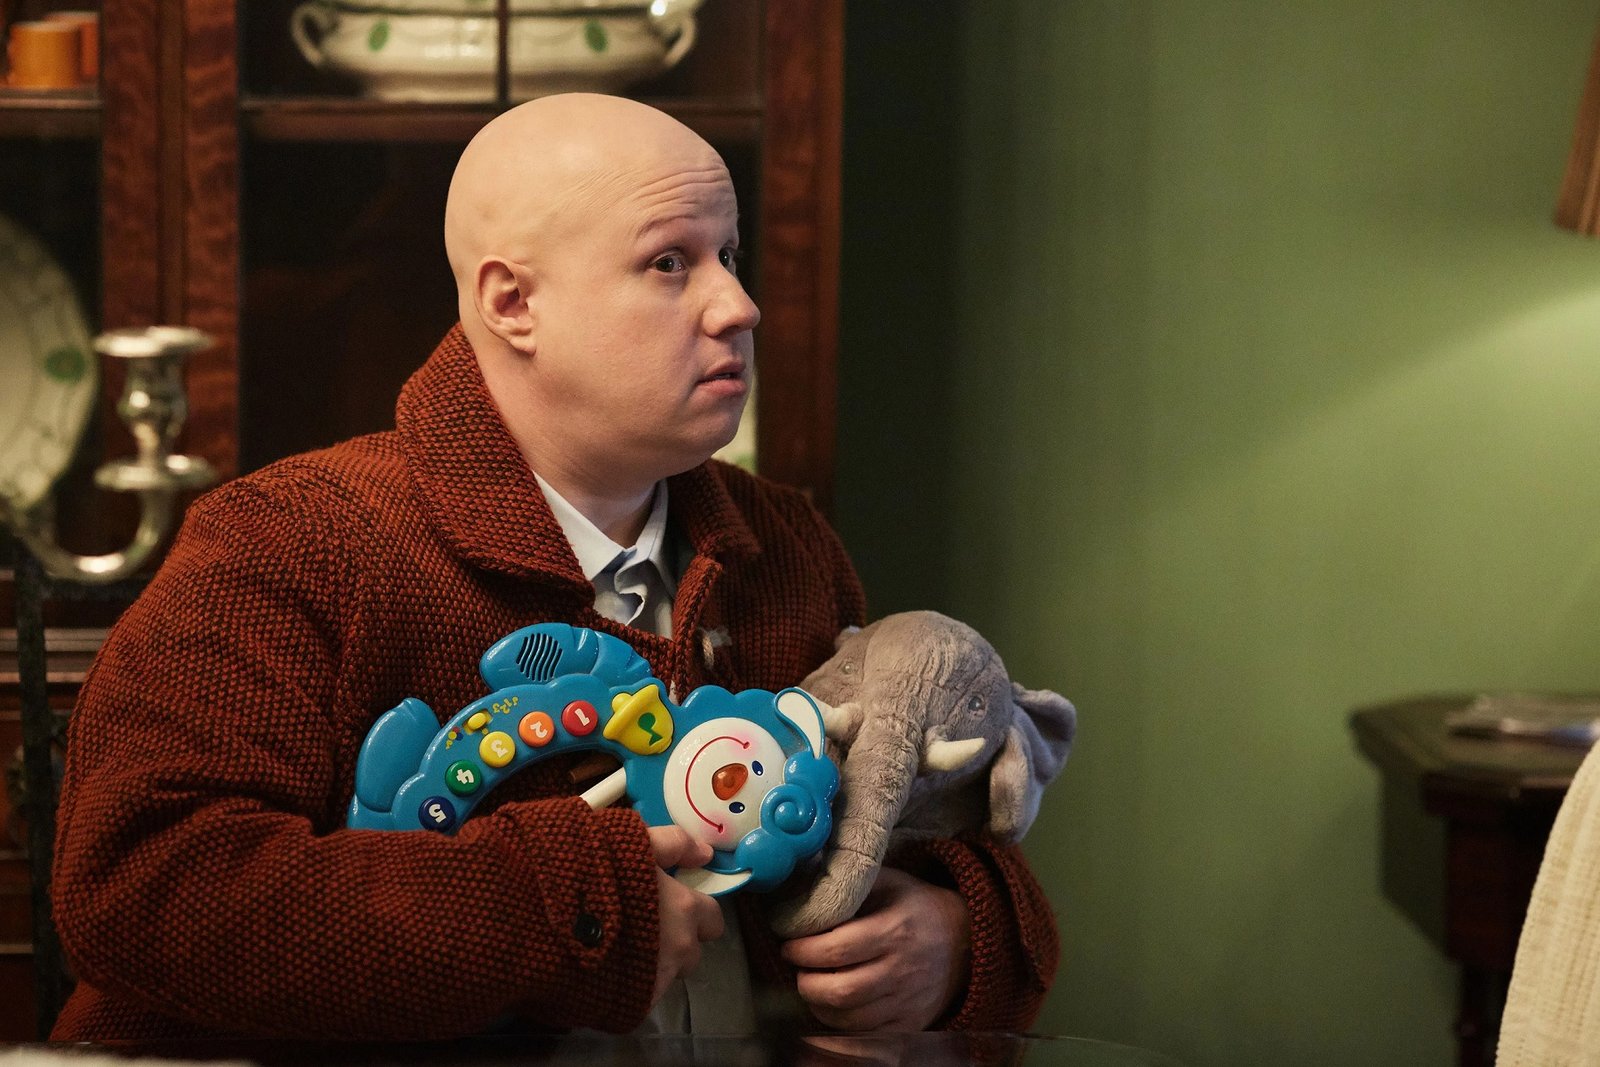 Matt Lucas Gets First Top 40 Single With Song to Benefit the NHS